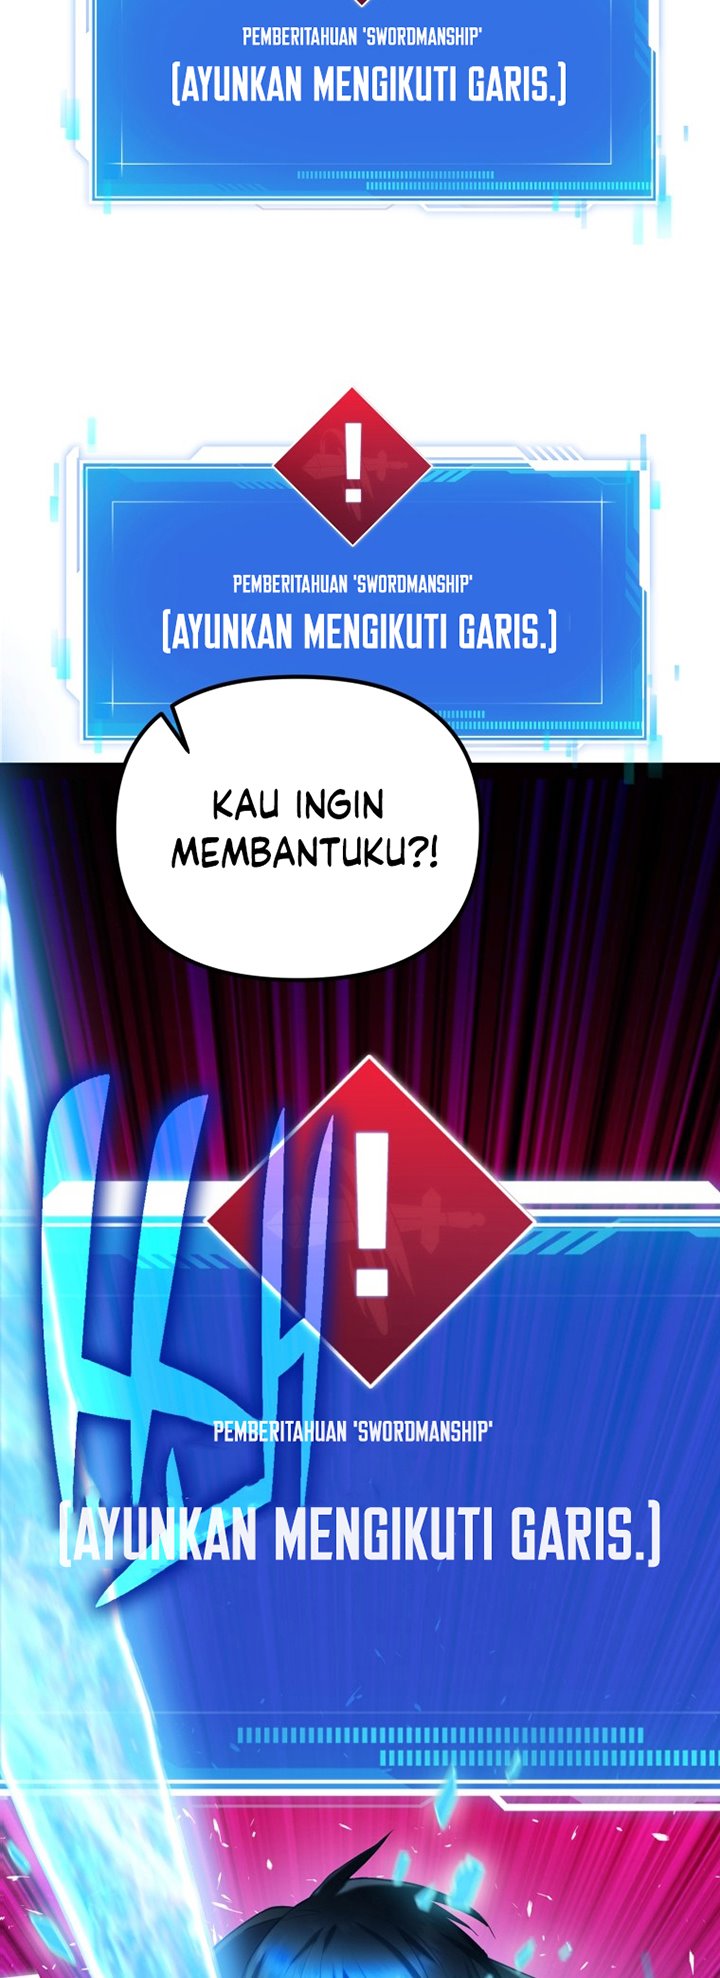 Maxed Out Leveling Chapter 07 Bahasa Indonesia